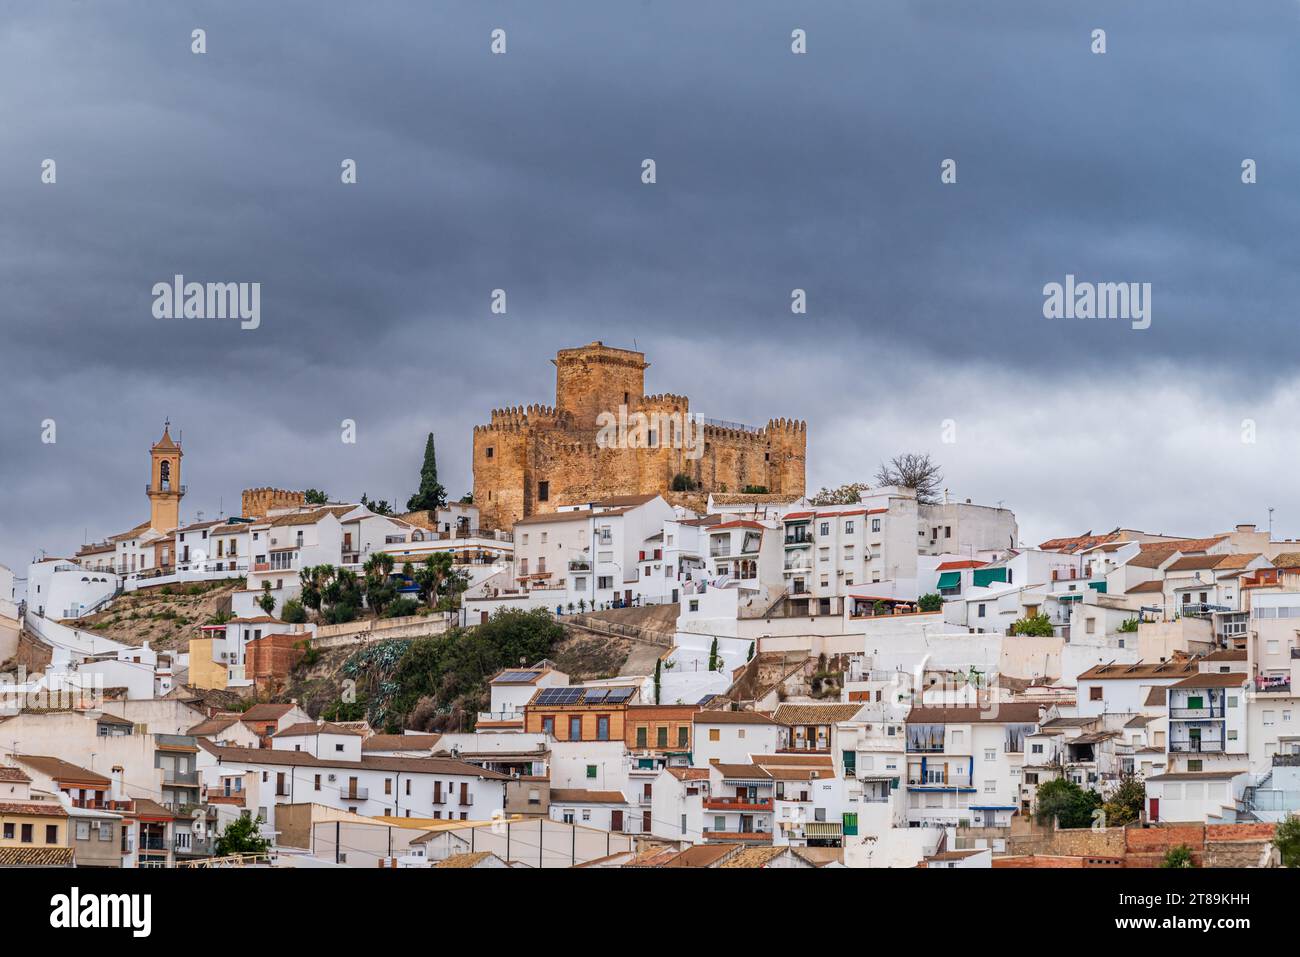 Ducal Castle of Espejo, Cordoba, built on a hilltop and surrounded by white houses, Andalucia Stock Photo